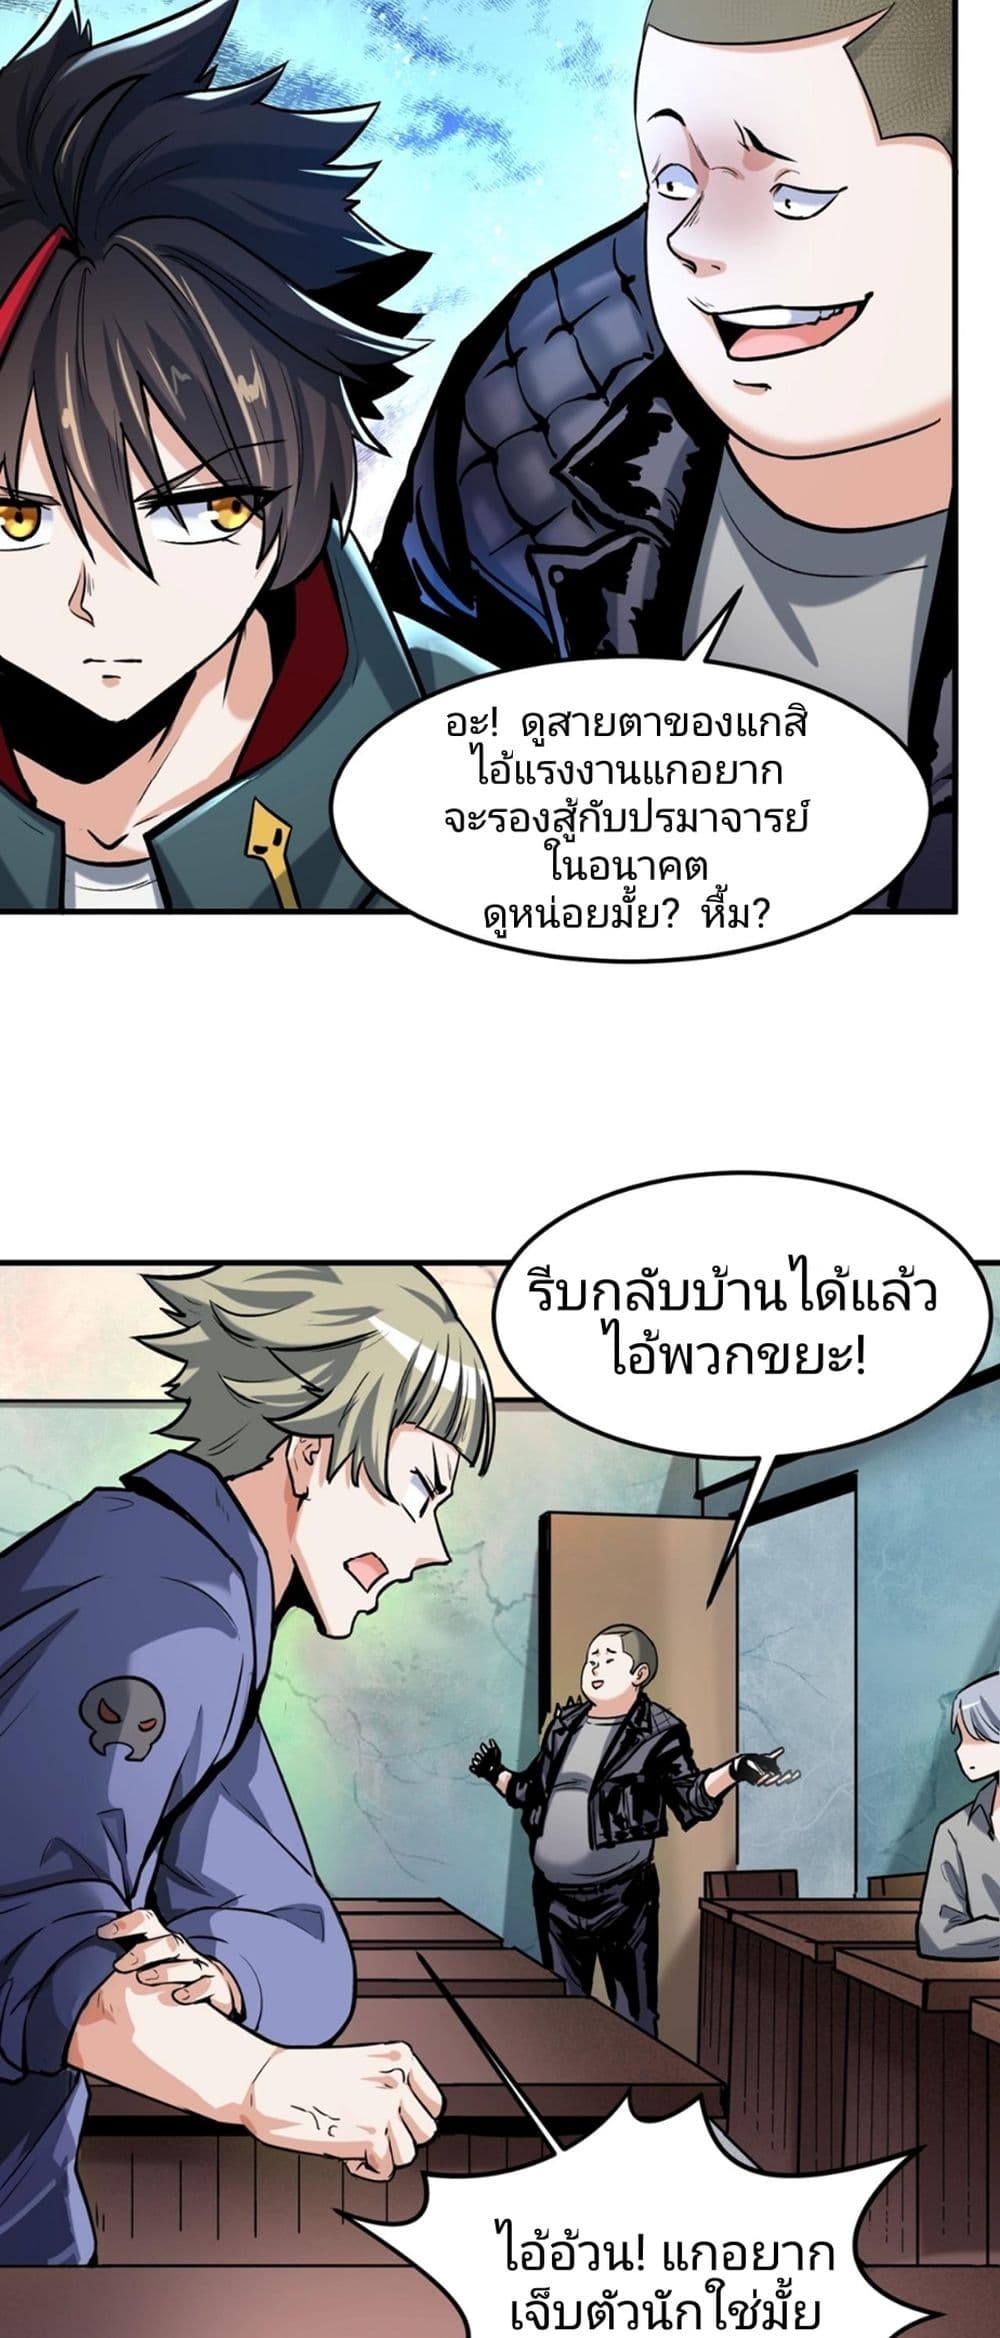 The Age of Ghost Spirits à¸à¸­à¸à¸à¸µà¹ 1 (32)